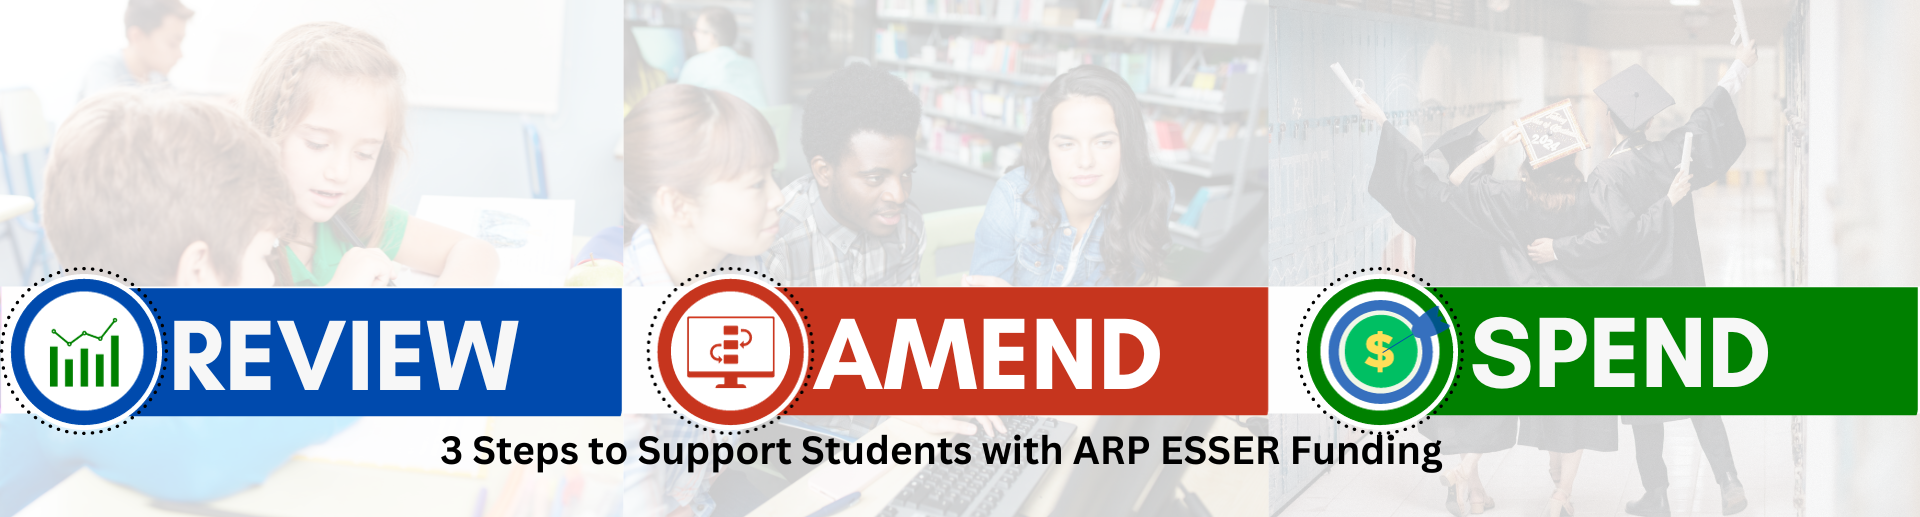 Review. Amend. Spend. 3 Steps to Support Students with ARP ESSER funding